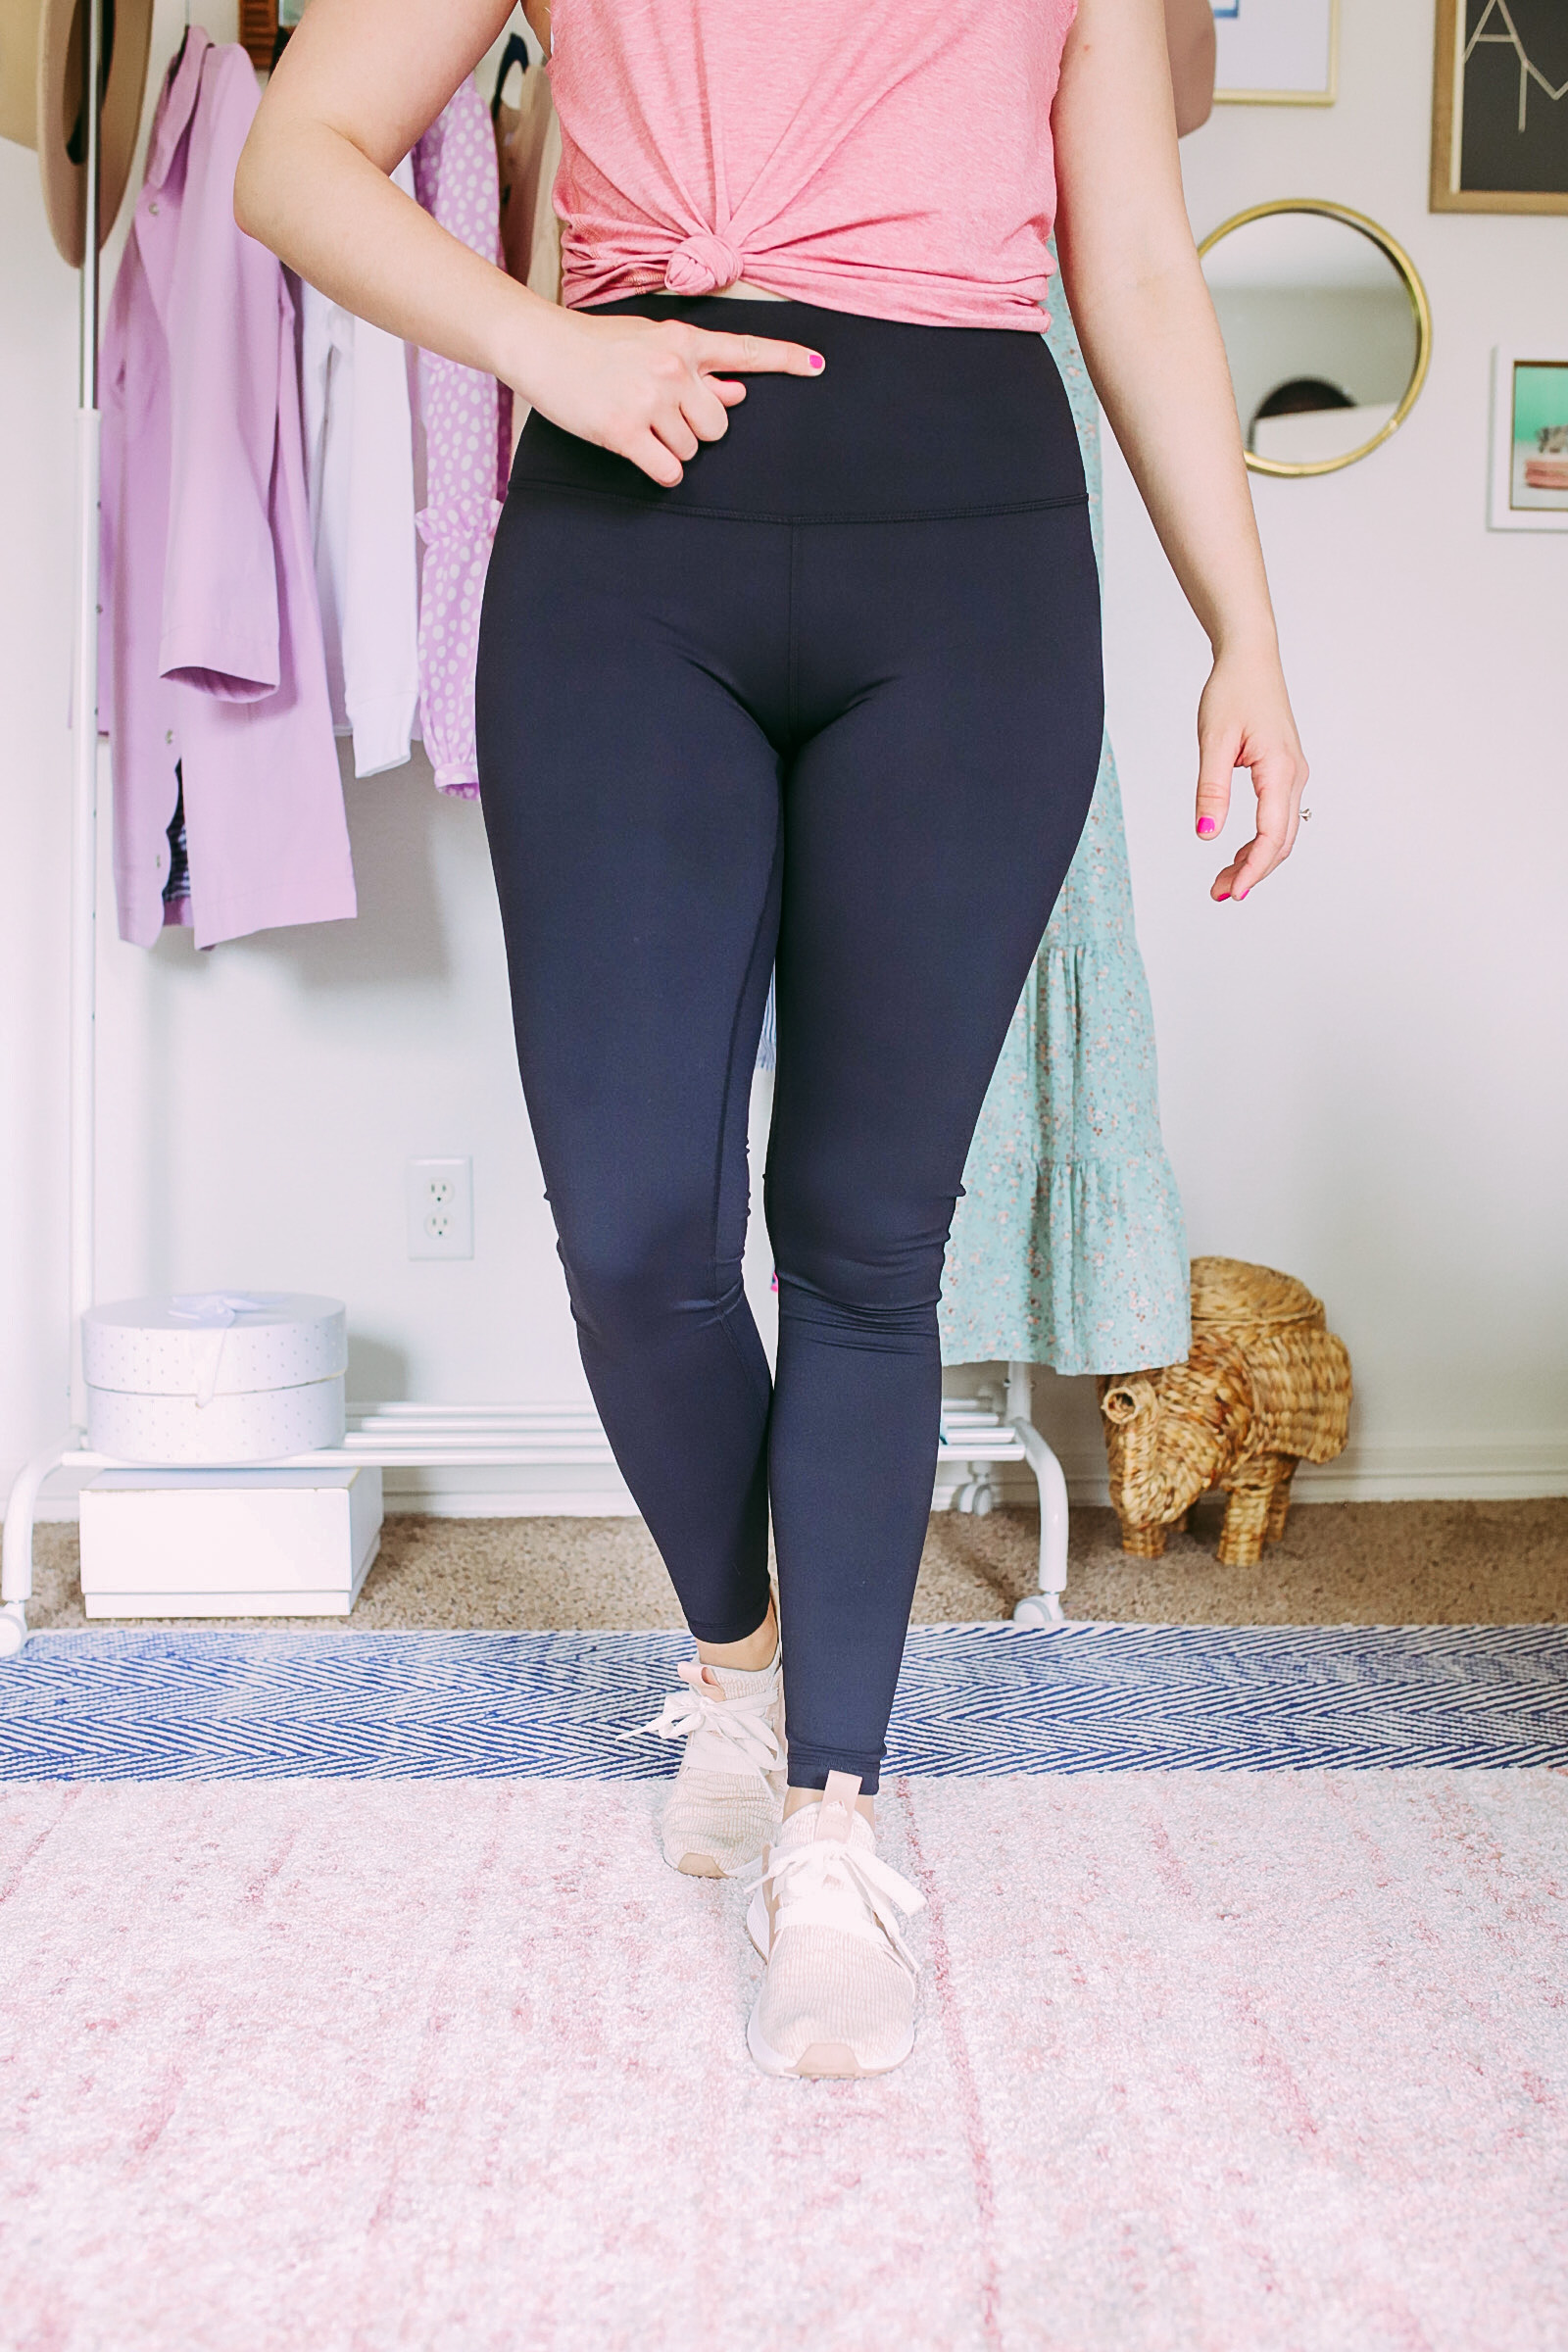 Align 6 inch shorts are my new favorite 🤩 took me long enough to try a  pair! : r/lululemon